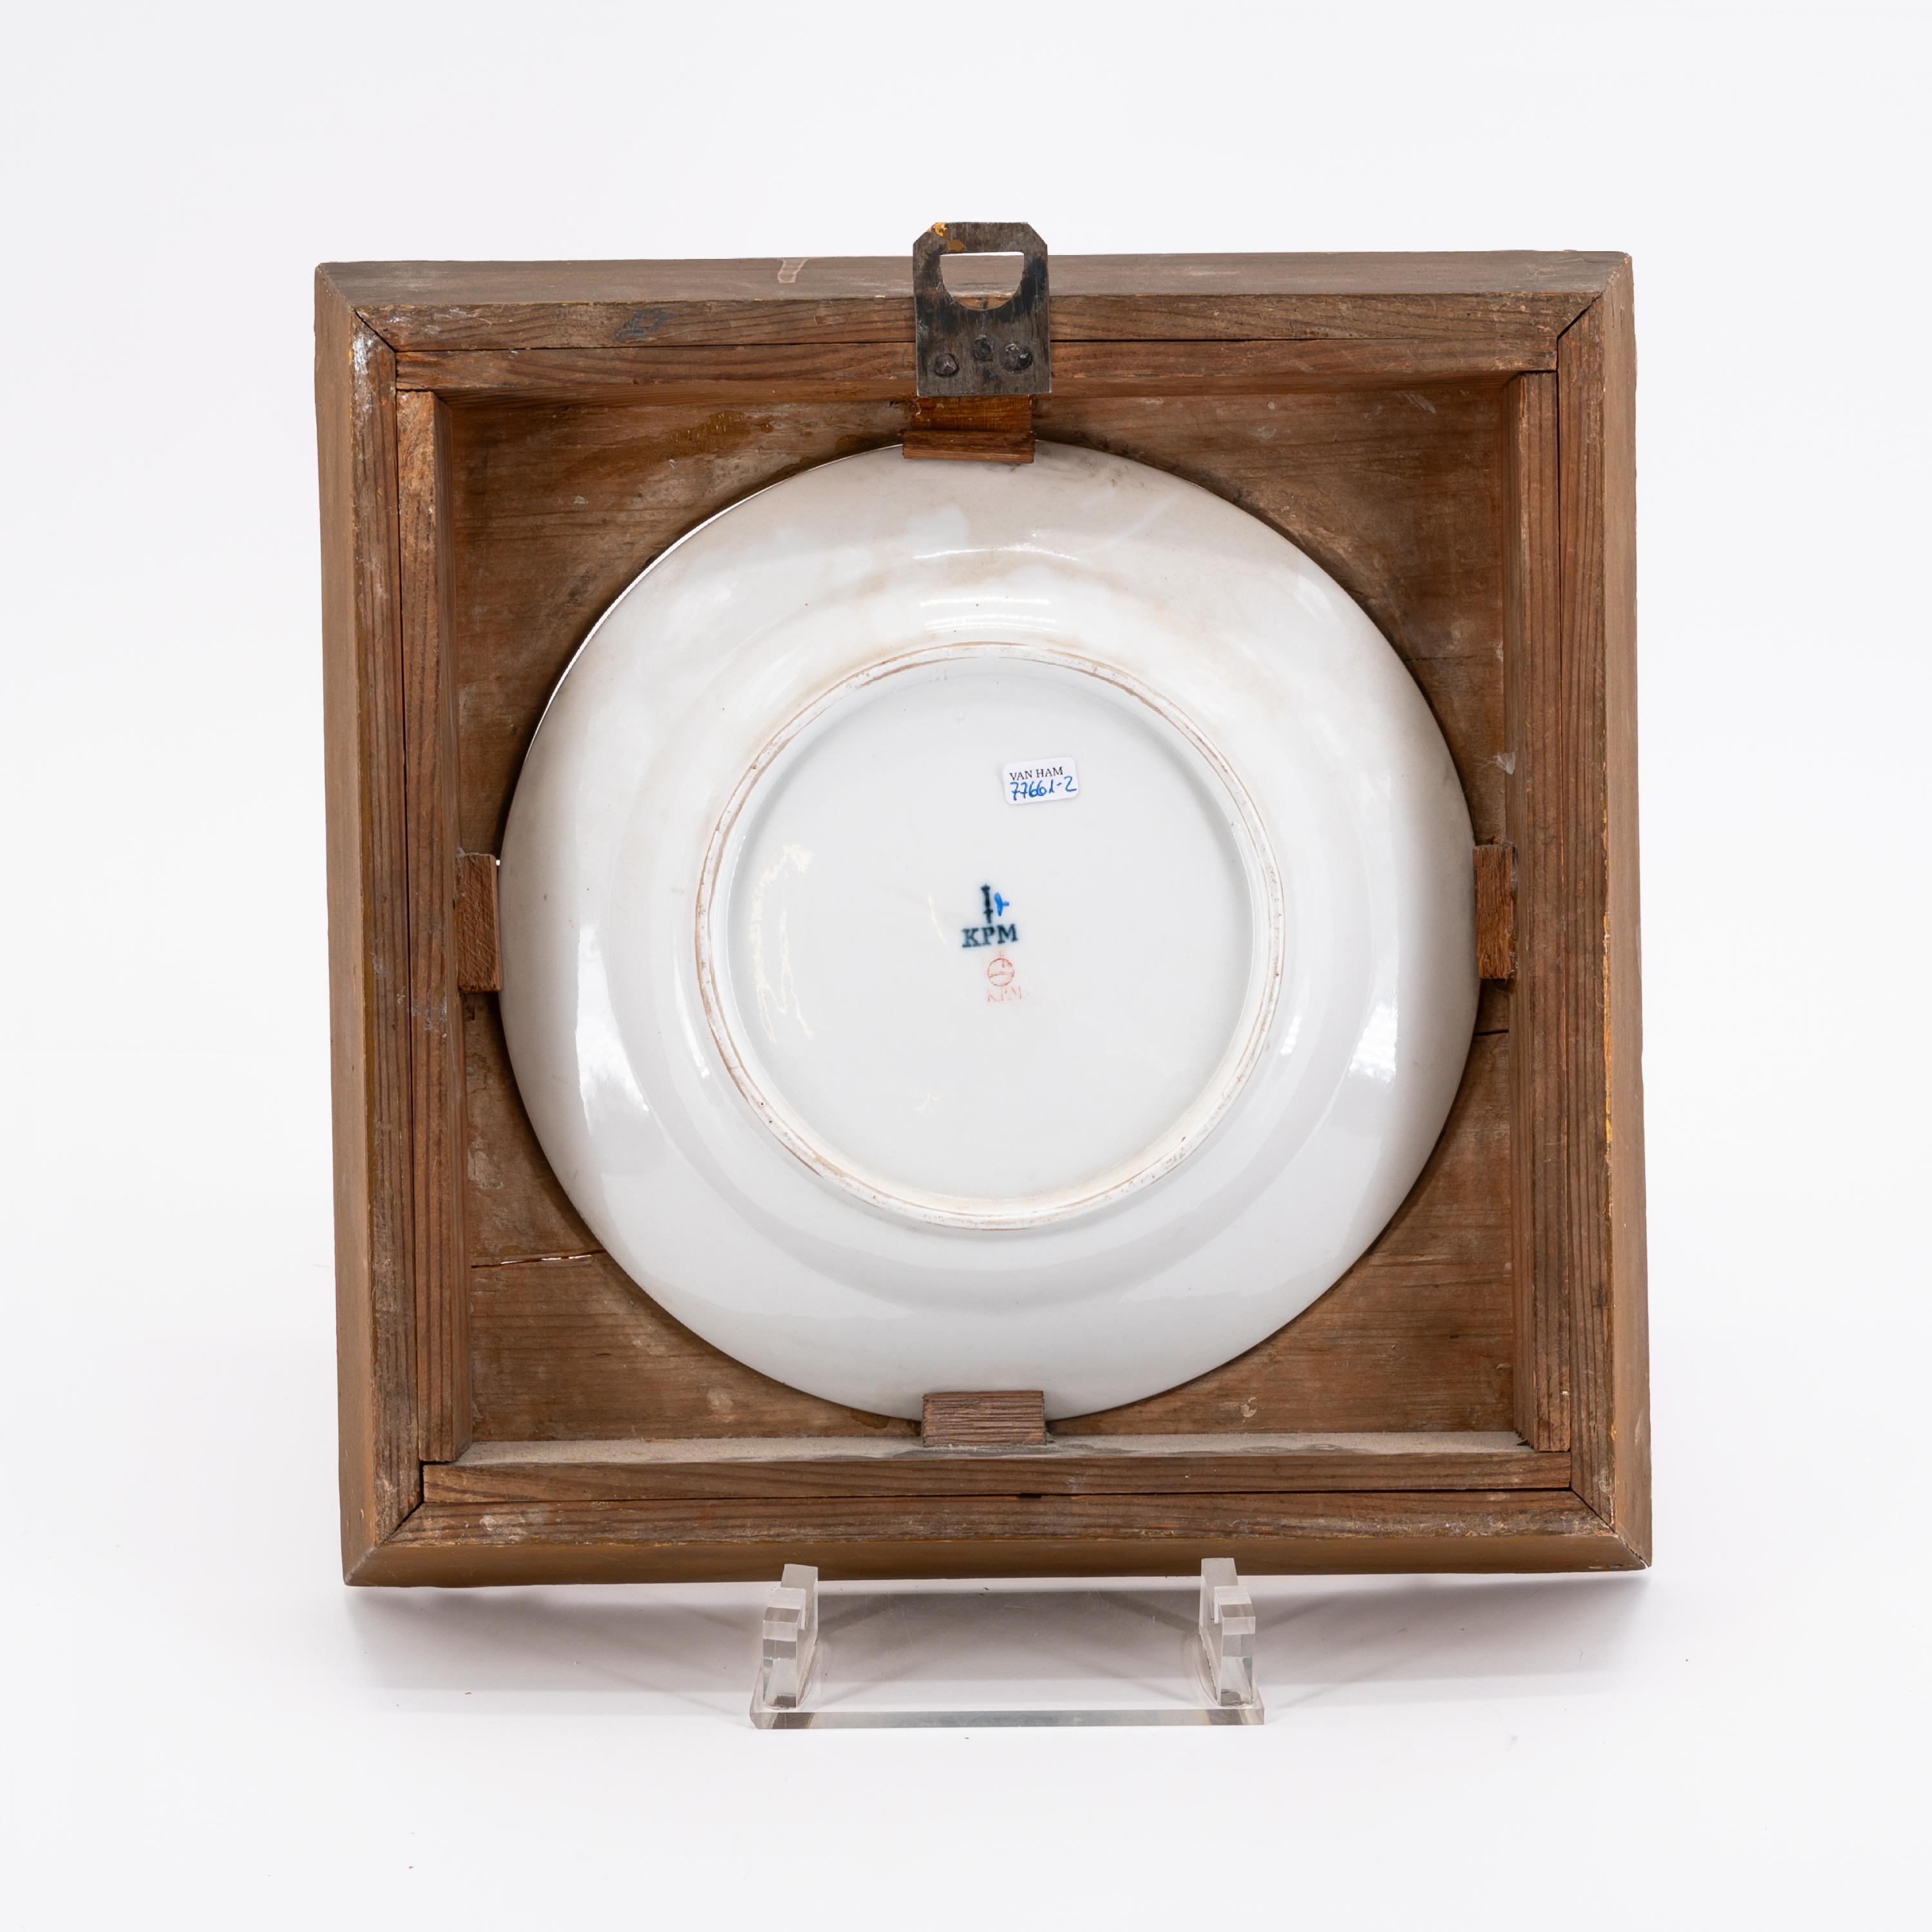 EXEPTIONAL SERIES OF TWELVE PORCELAIN PLATES WITH ROMANTIC VIEWS OF THE RHINE - Image 20 of 26